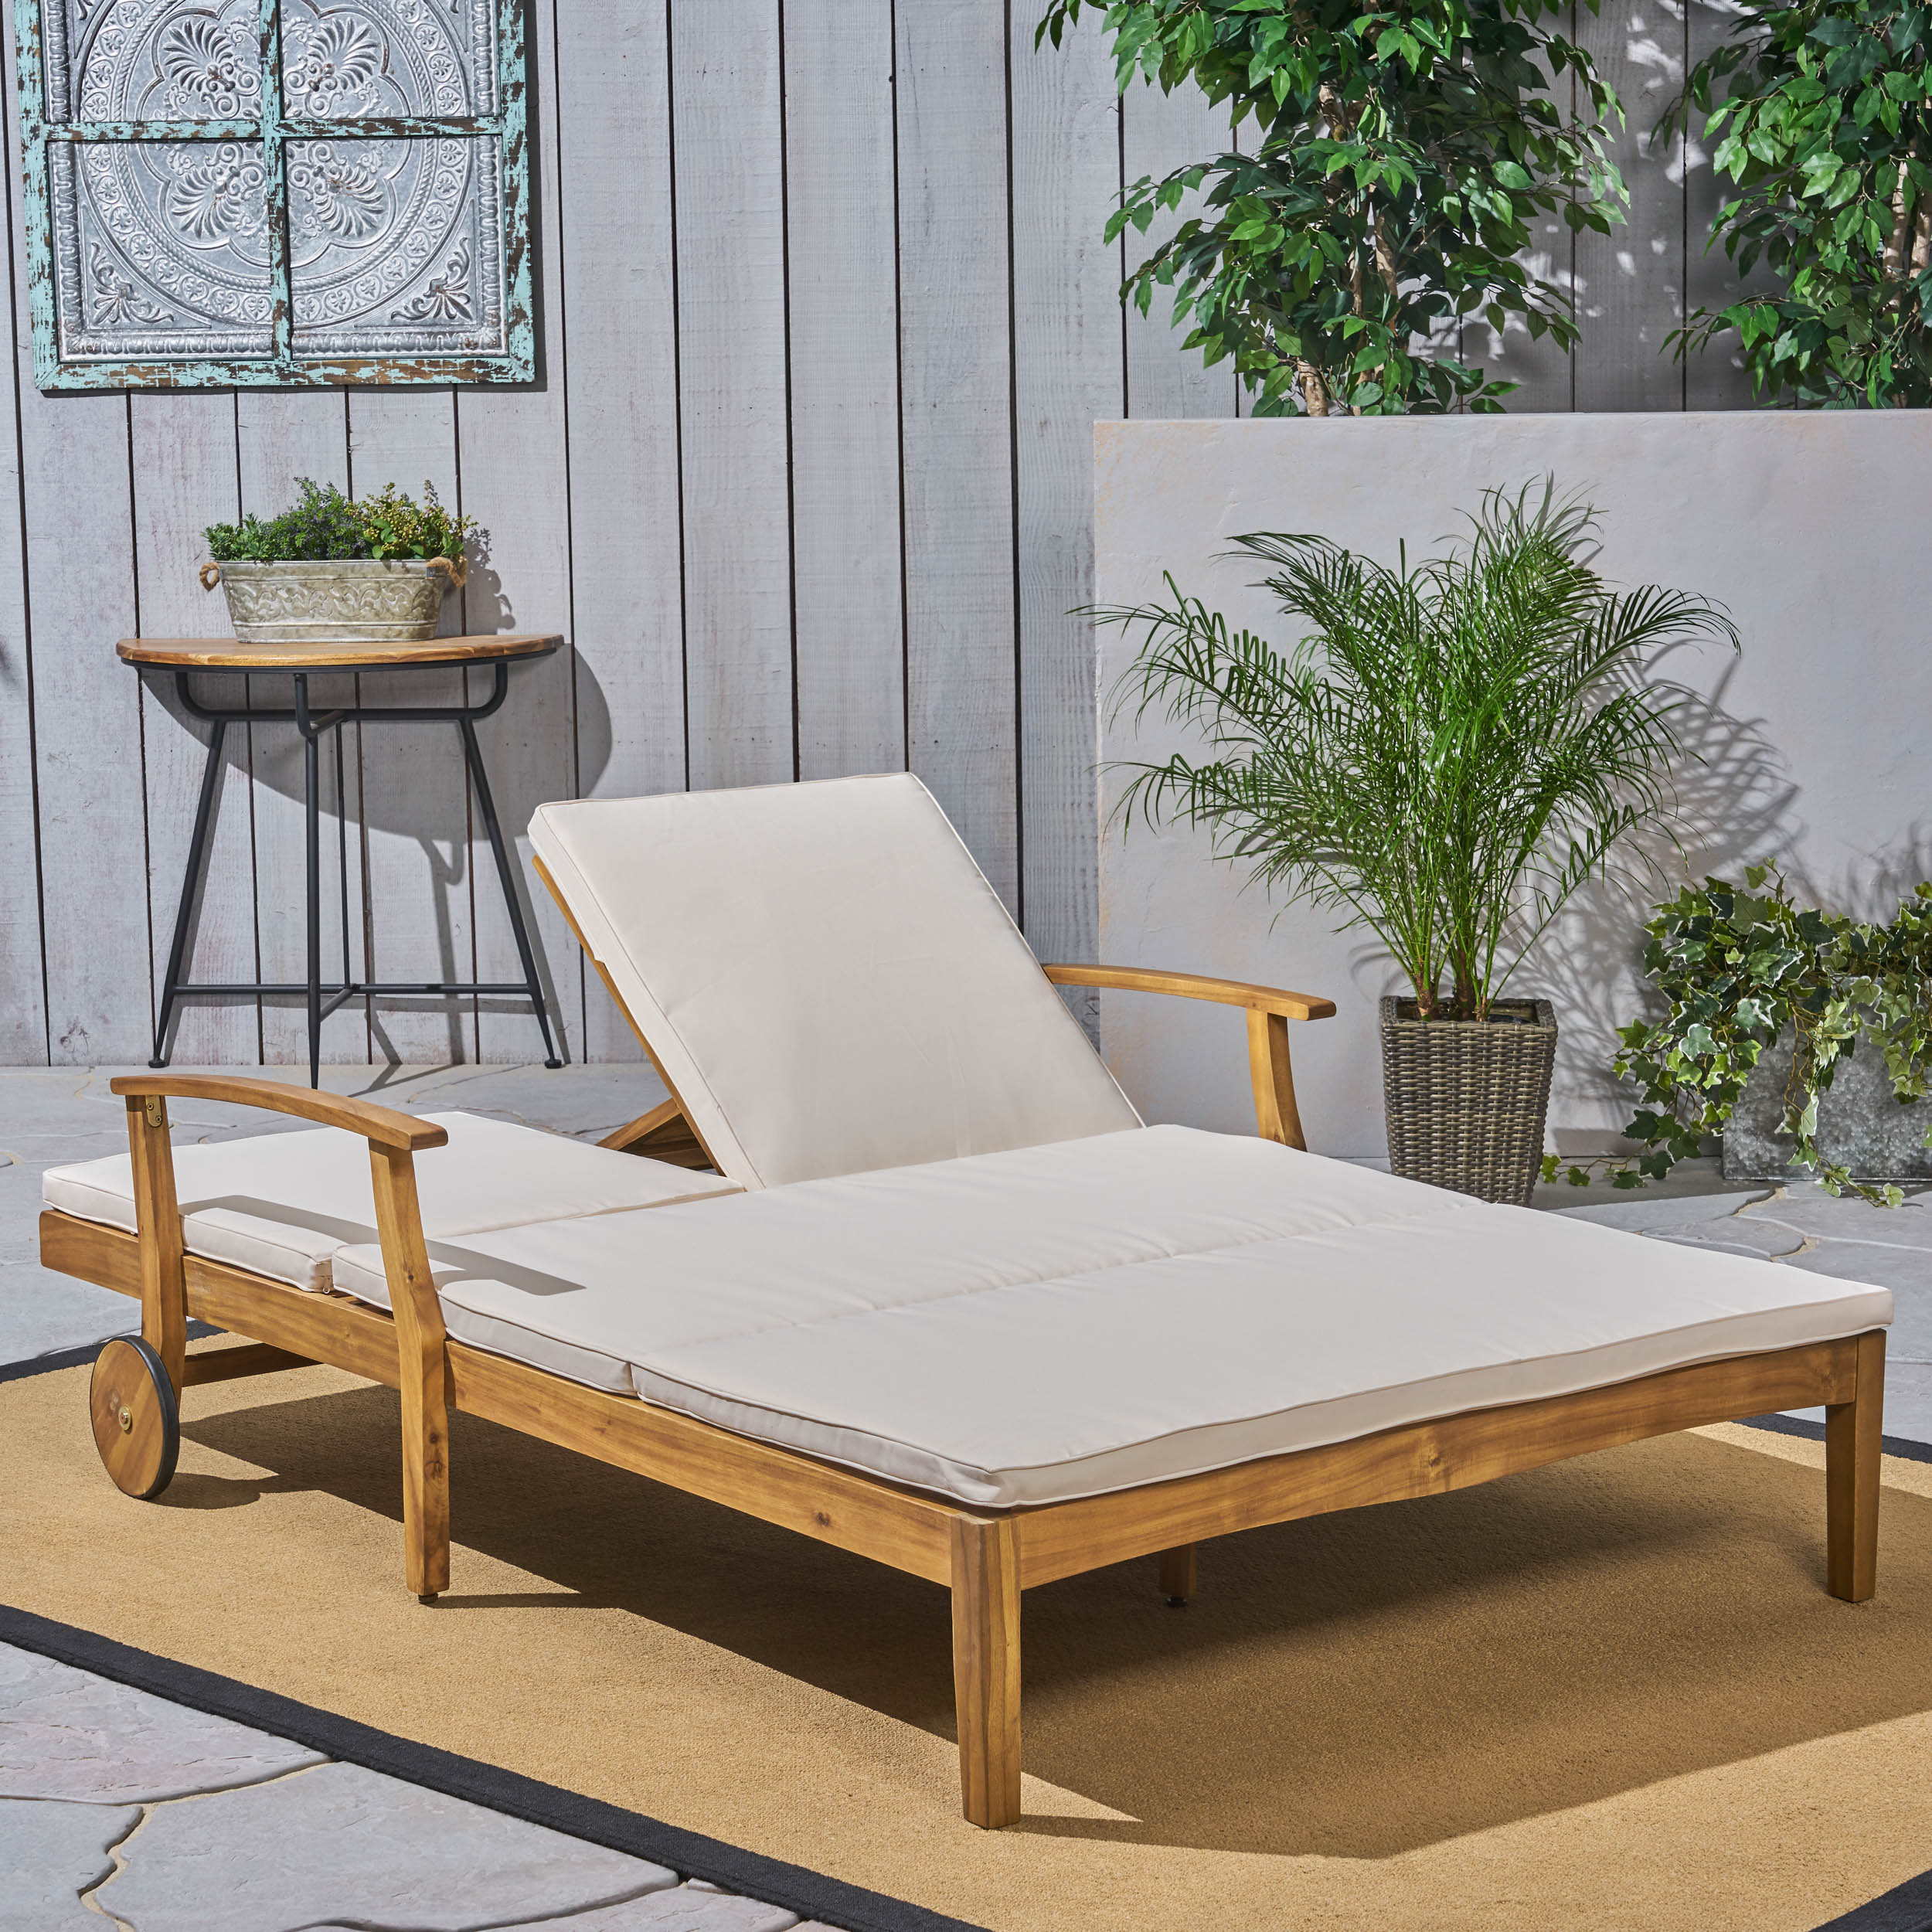 Danielle Outdoor Acacia Wood Double Chaise Lounge with Cushion, Teak, Cream - image 2 of 6